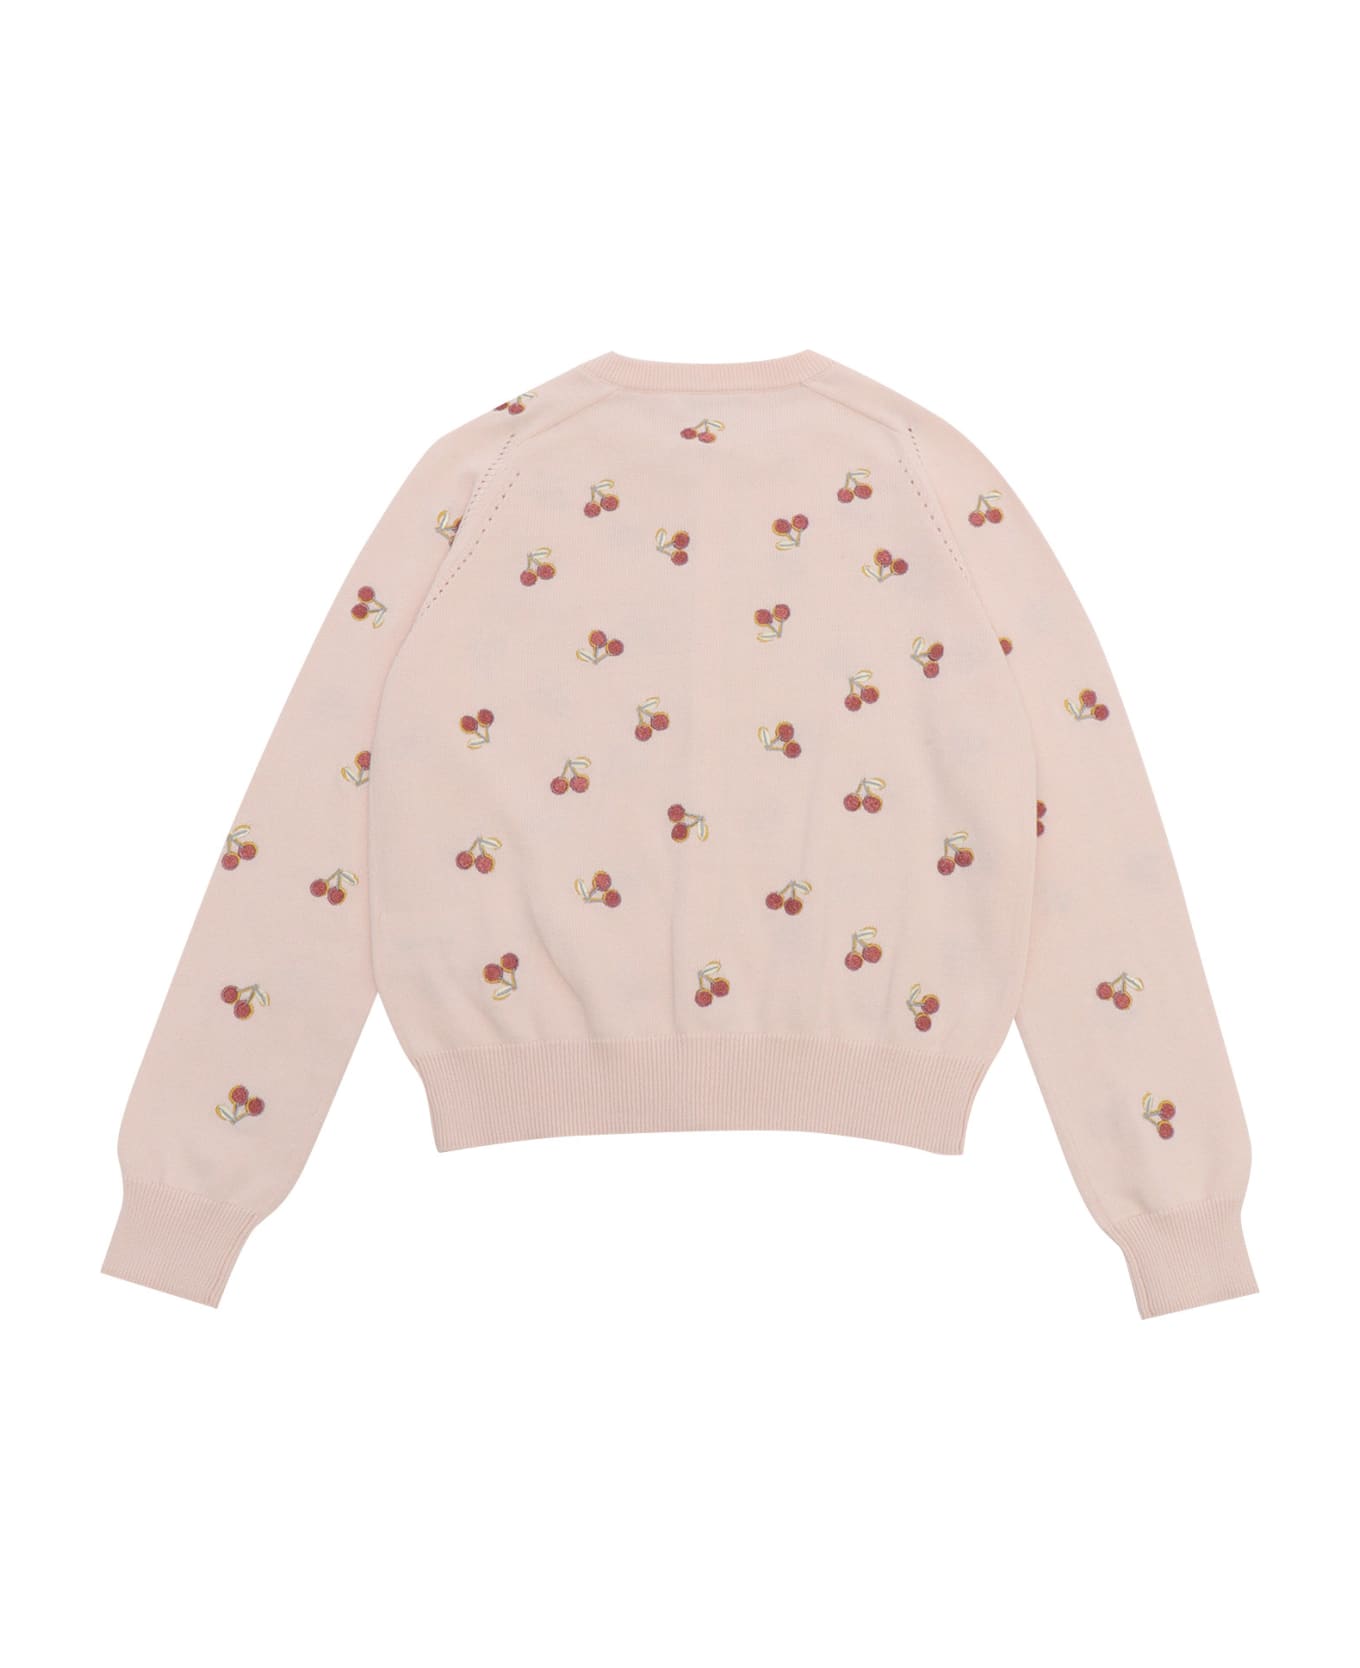 Bonpoint Pink Aizoon Cardigan - PINK